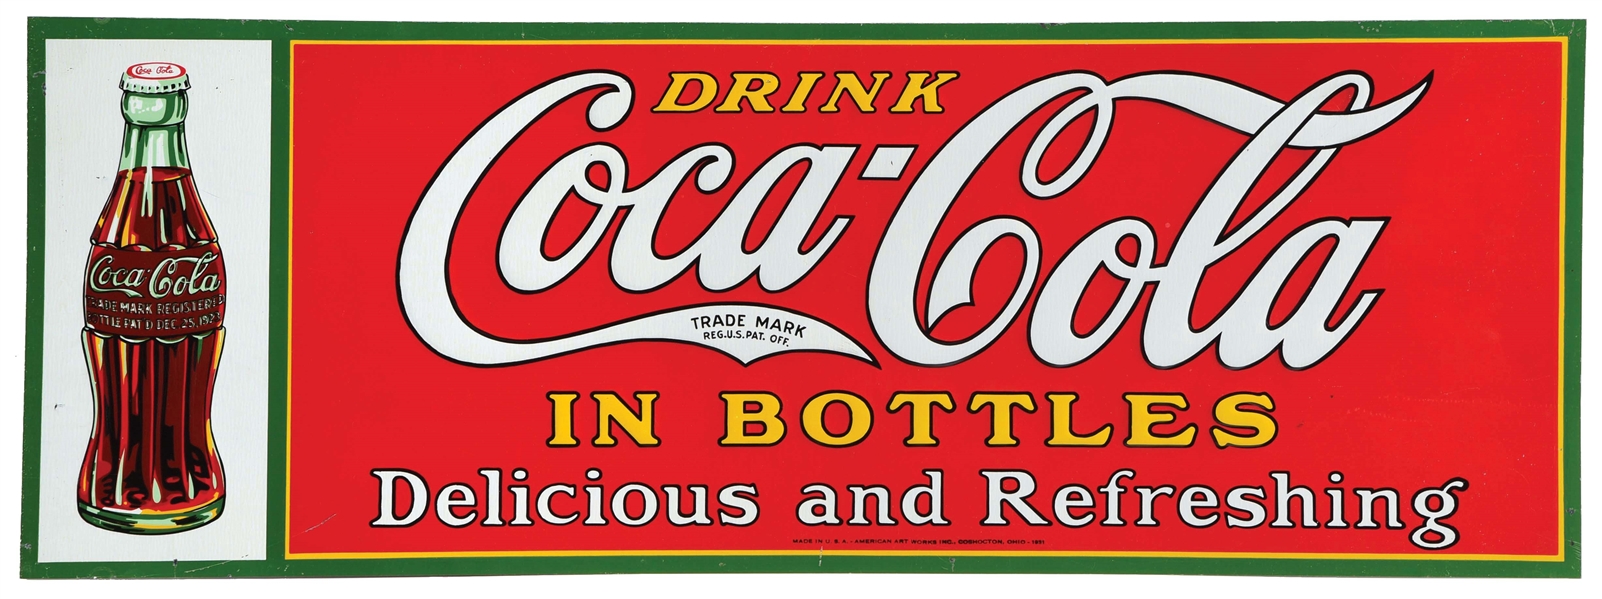 EARLY DRINK COCA-COLA IN BOTTLES EMBOSSED TIN SIGN W/ CHRISTMAS BOTTLE GRAPHIC.